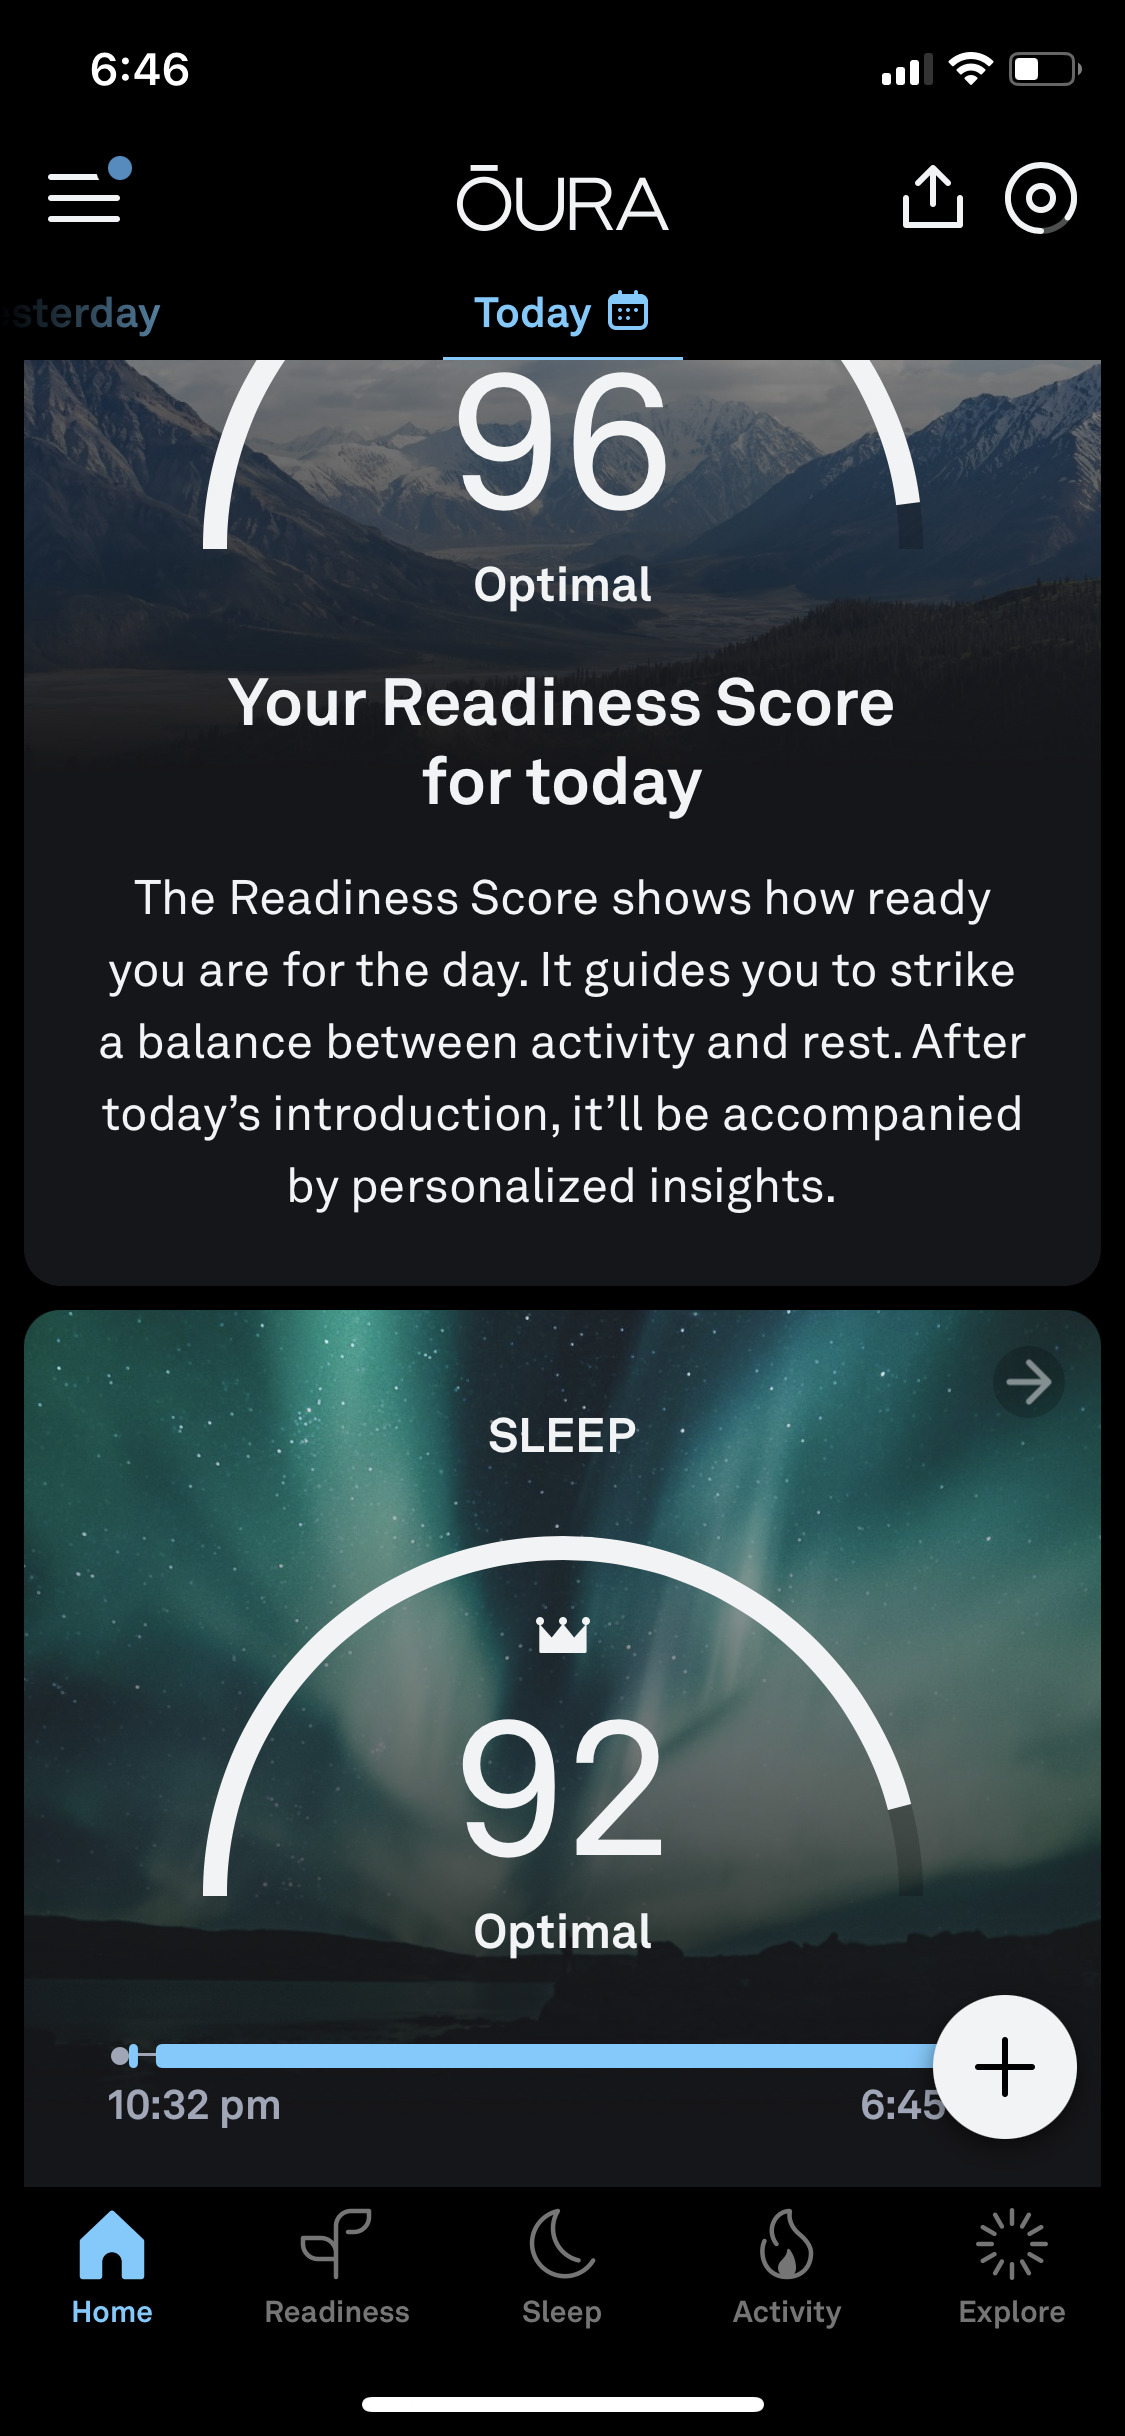 oura ring readiness score